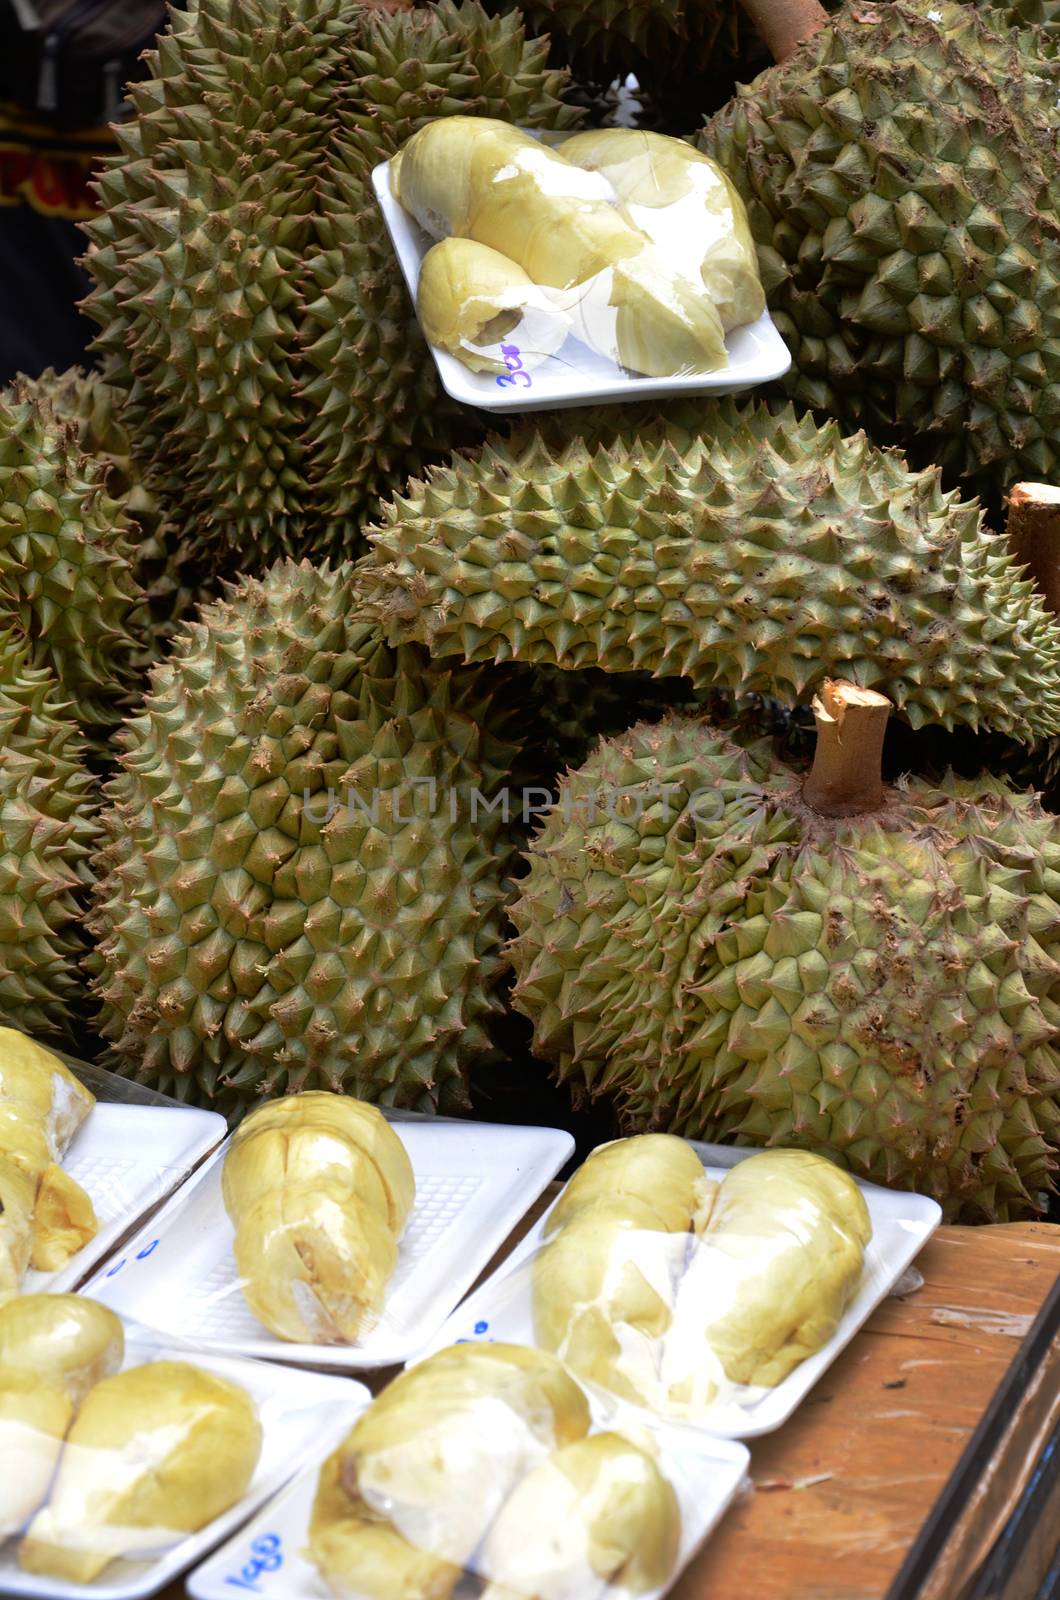 Durian at the street market by tang90246